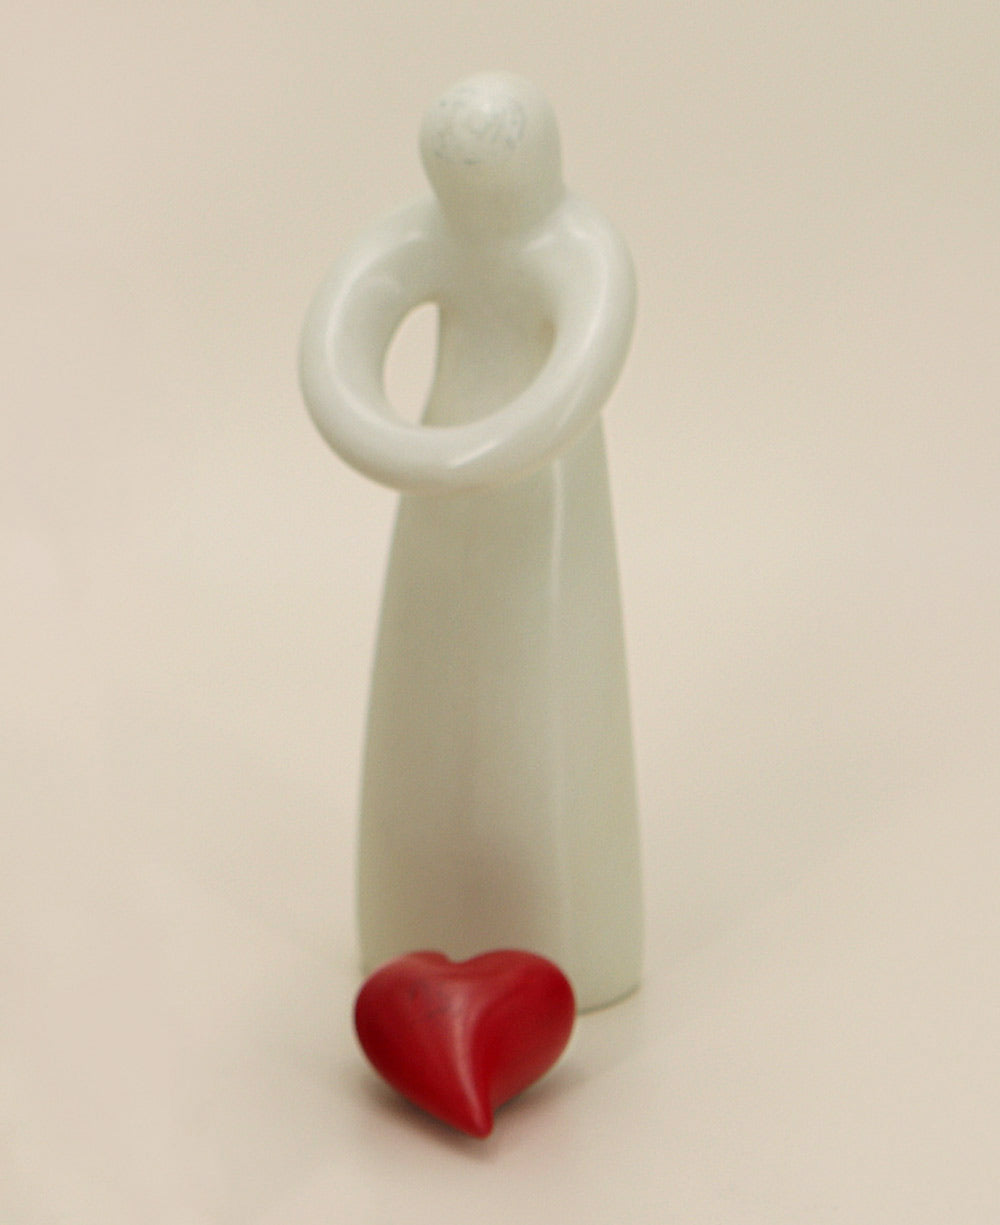 Soapstone hugging heart abstract sculpture in white